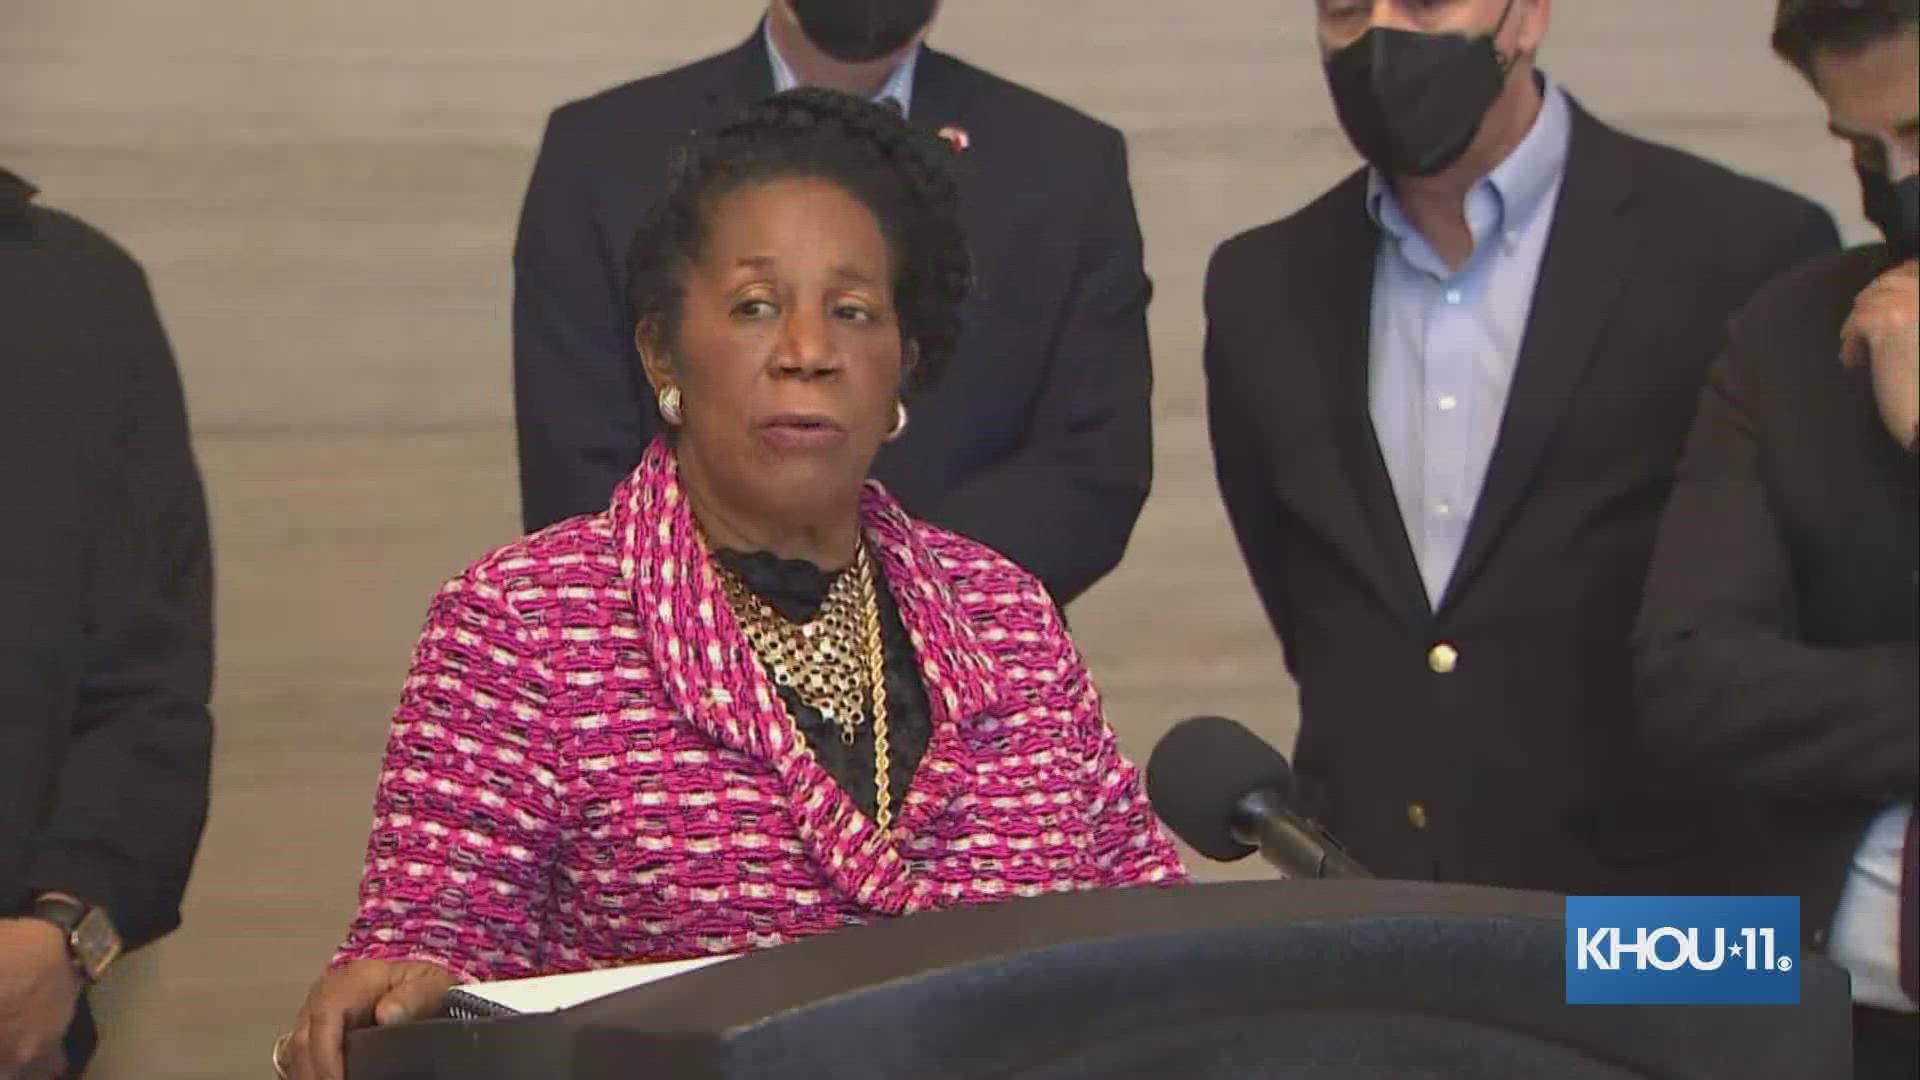 Rep. Sheila Jackson Lee was joined by several officials to address the Russian invasion of Ukraine.